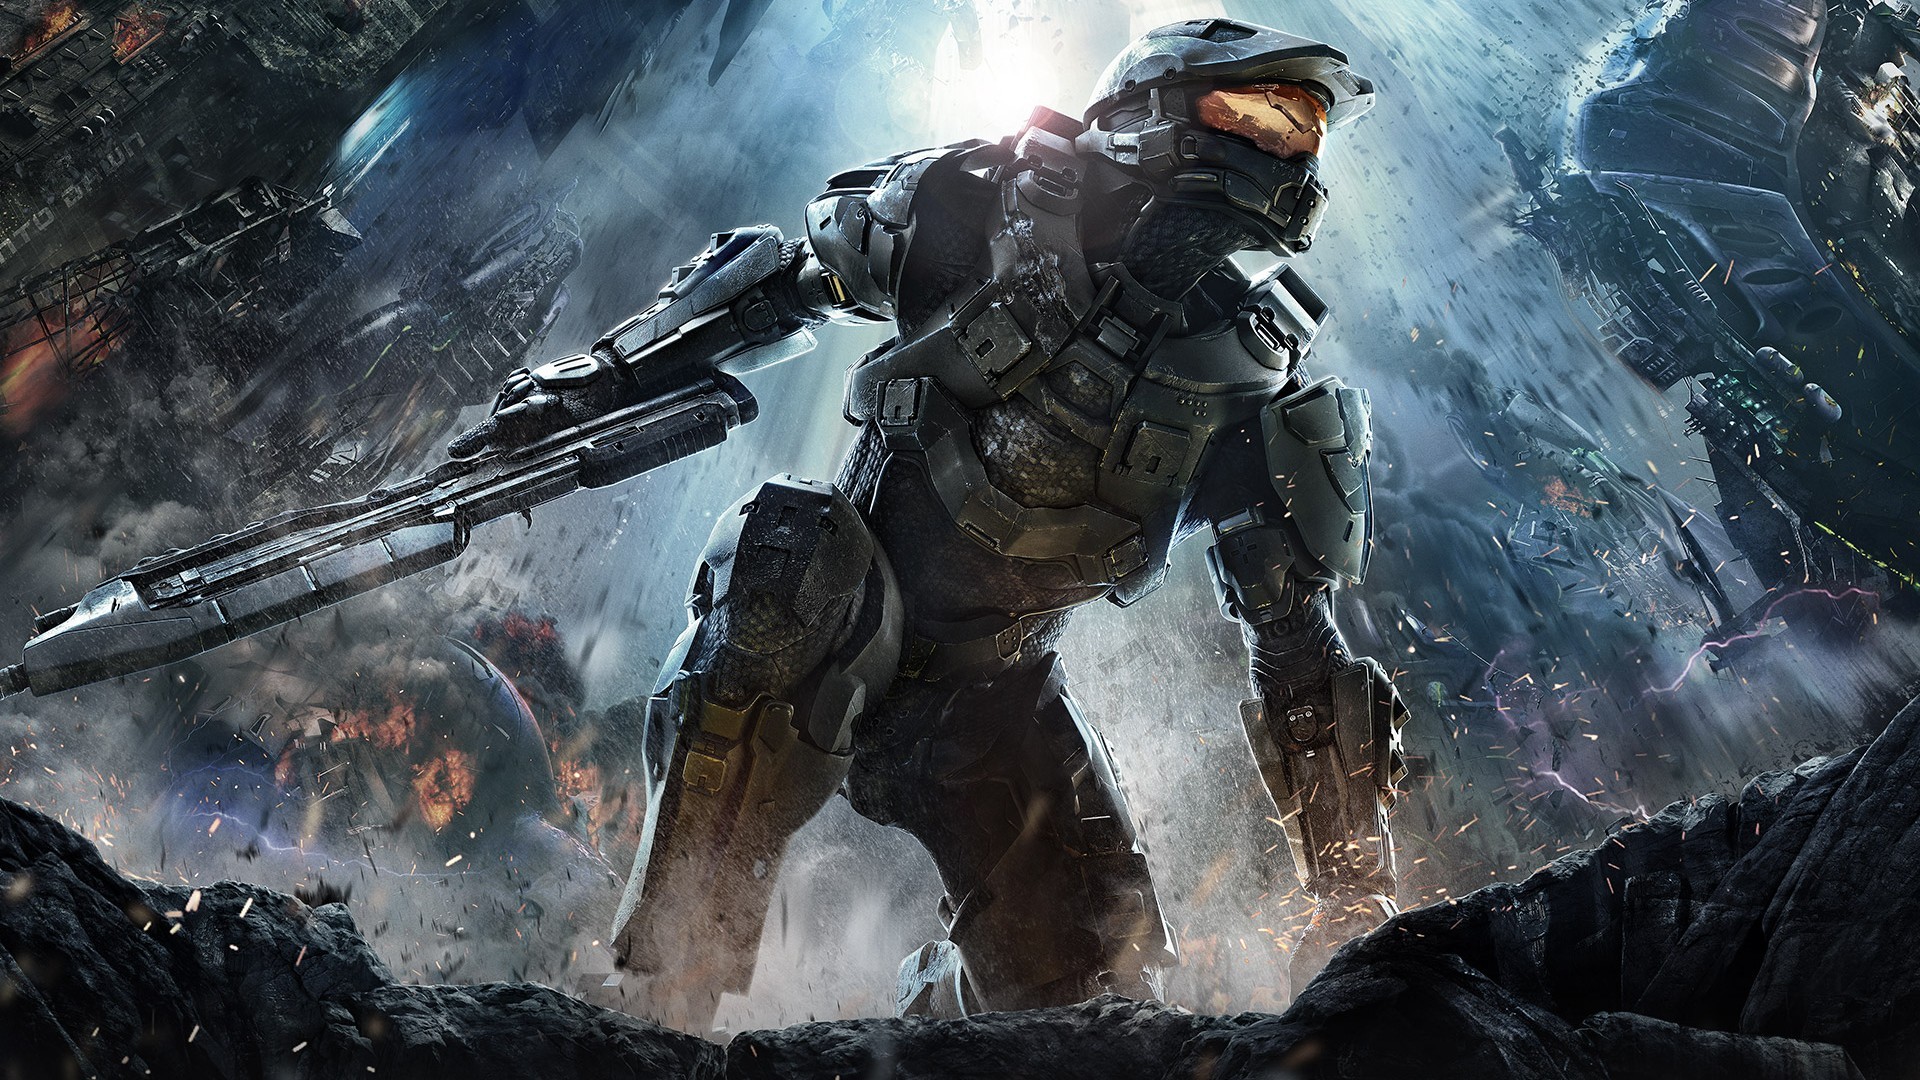 Halo: The Master Chief Collection gets massive update with Xbox